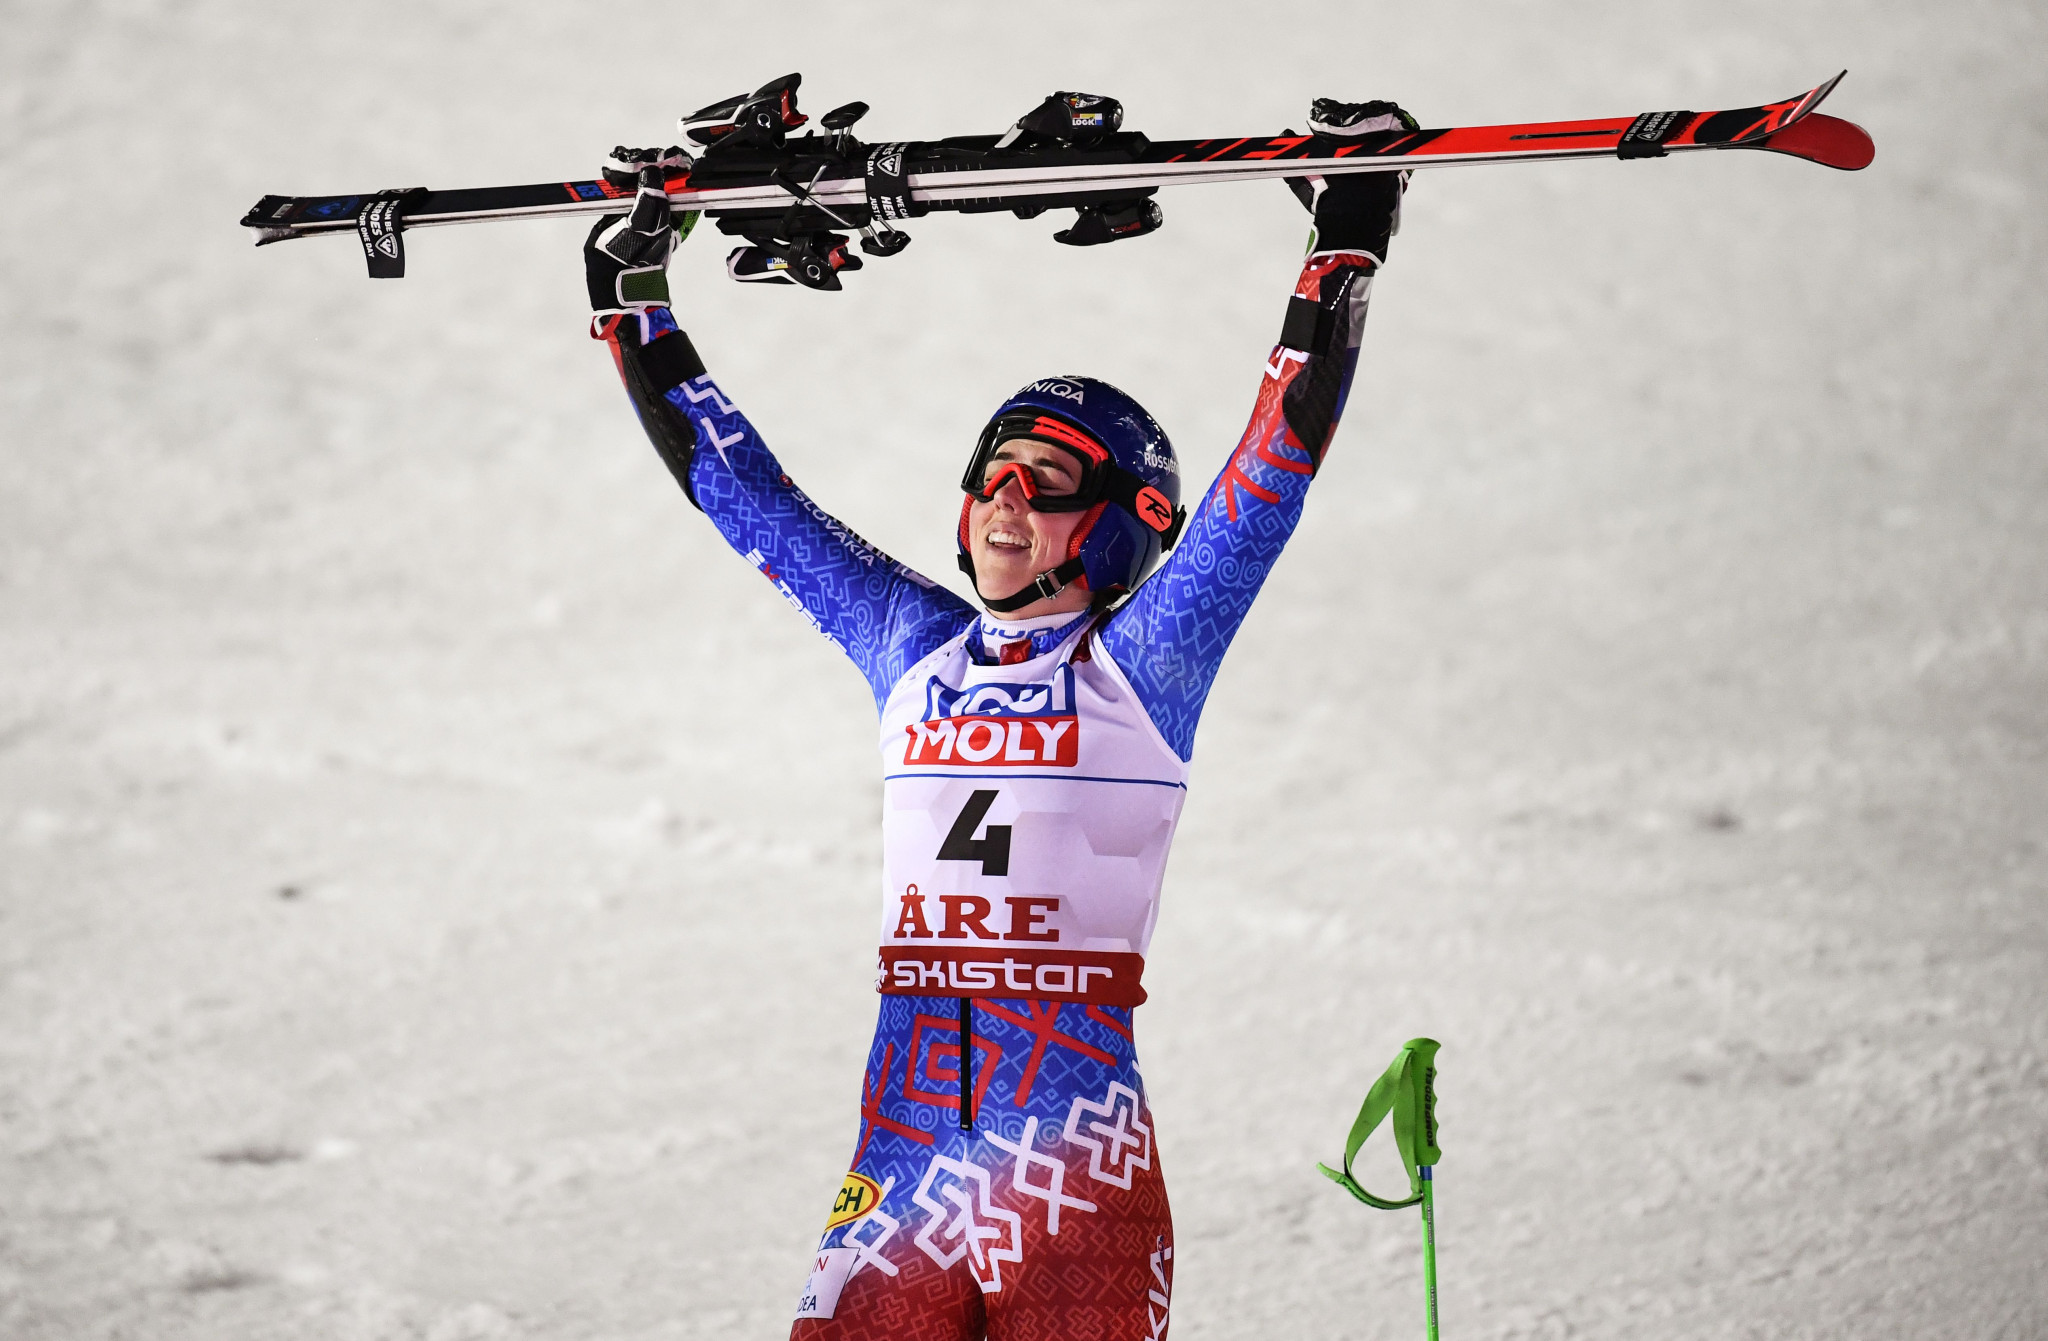 Petra Vlhova won the women's giant slalom at the World Alpine Skiing Championships in Åre to claim her first world gold ©Getty Images